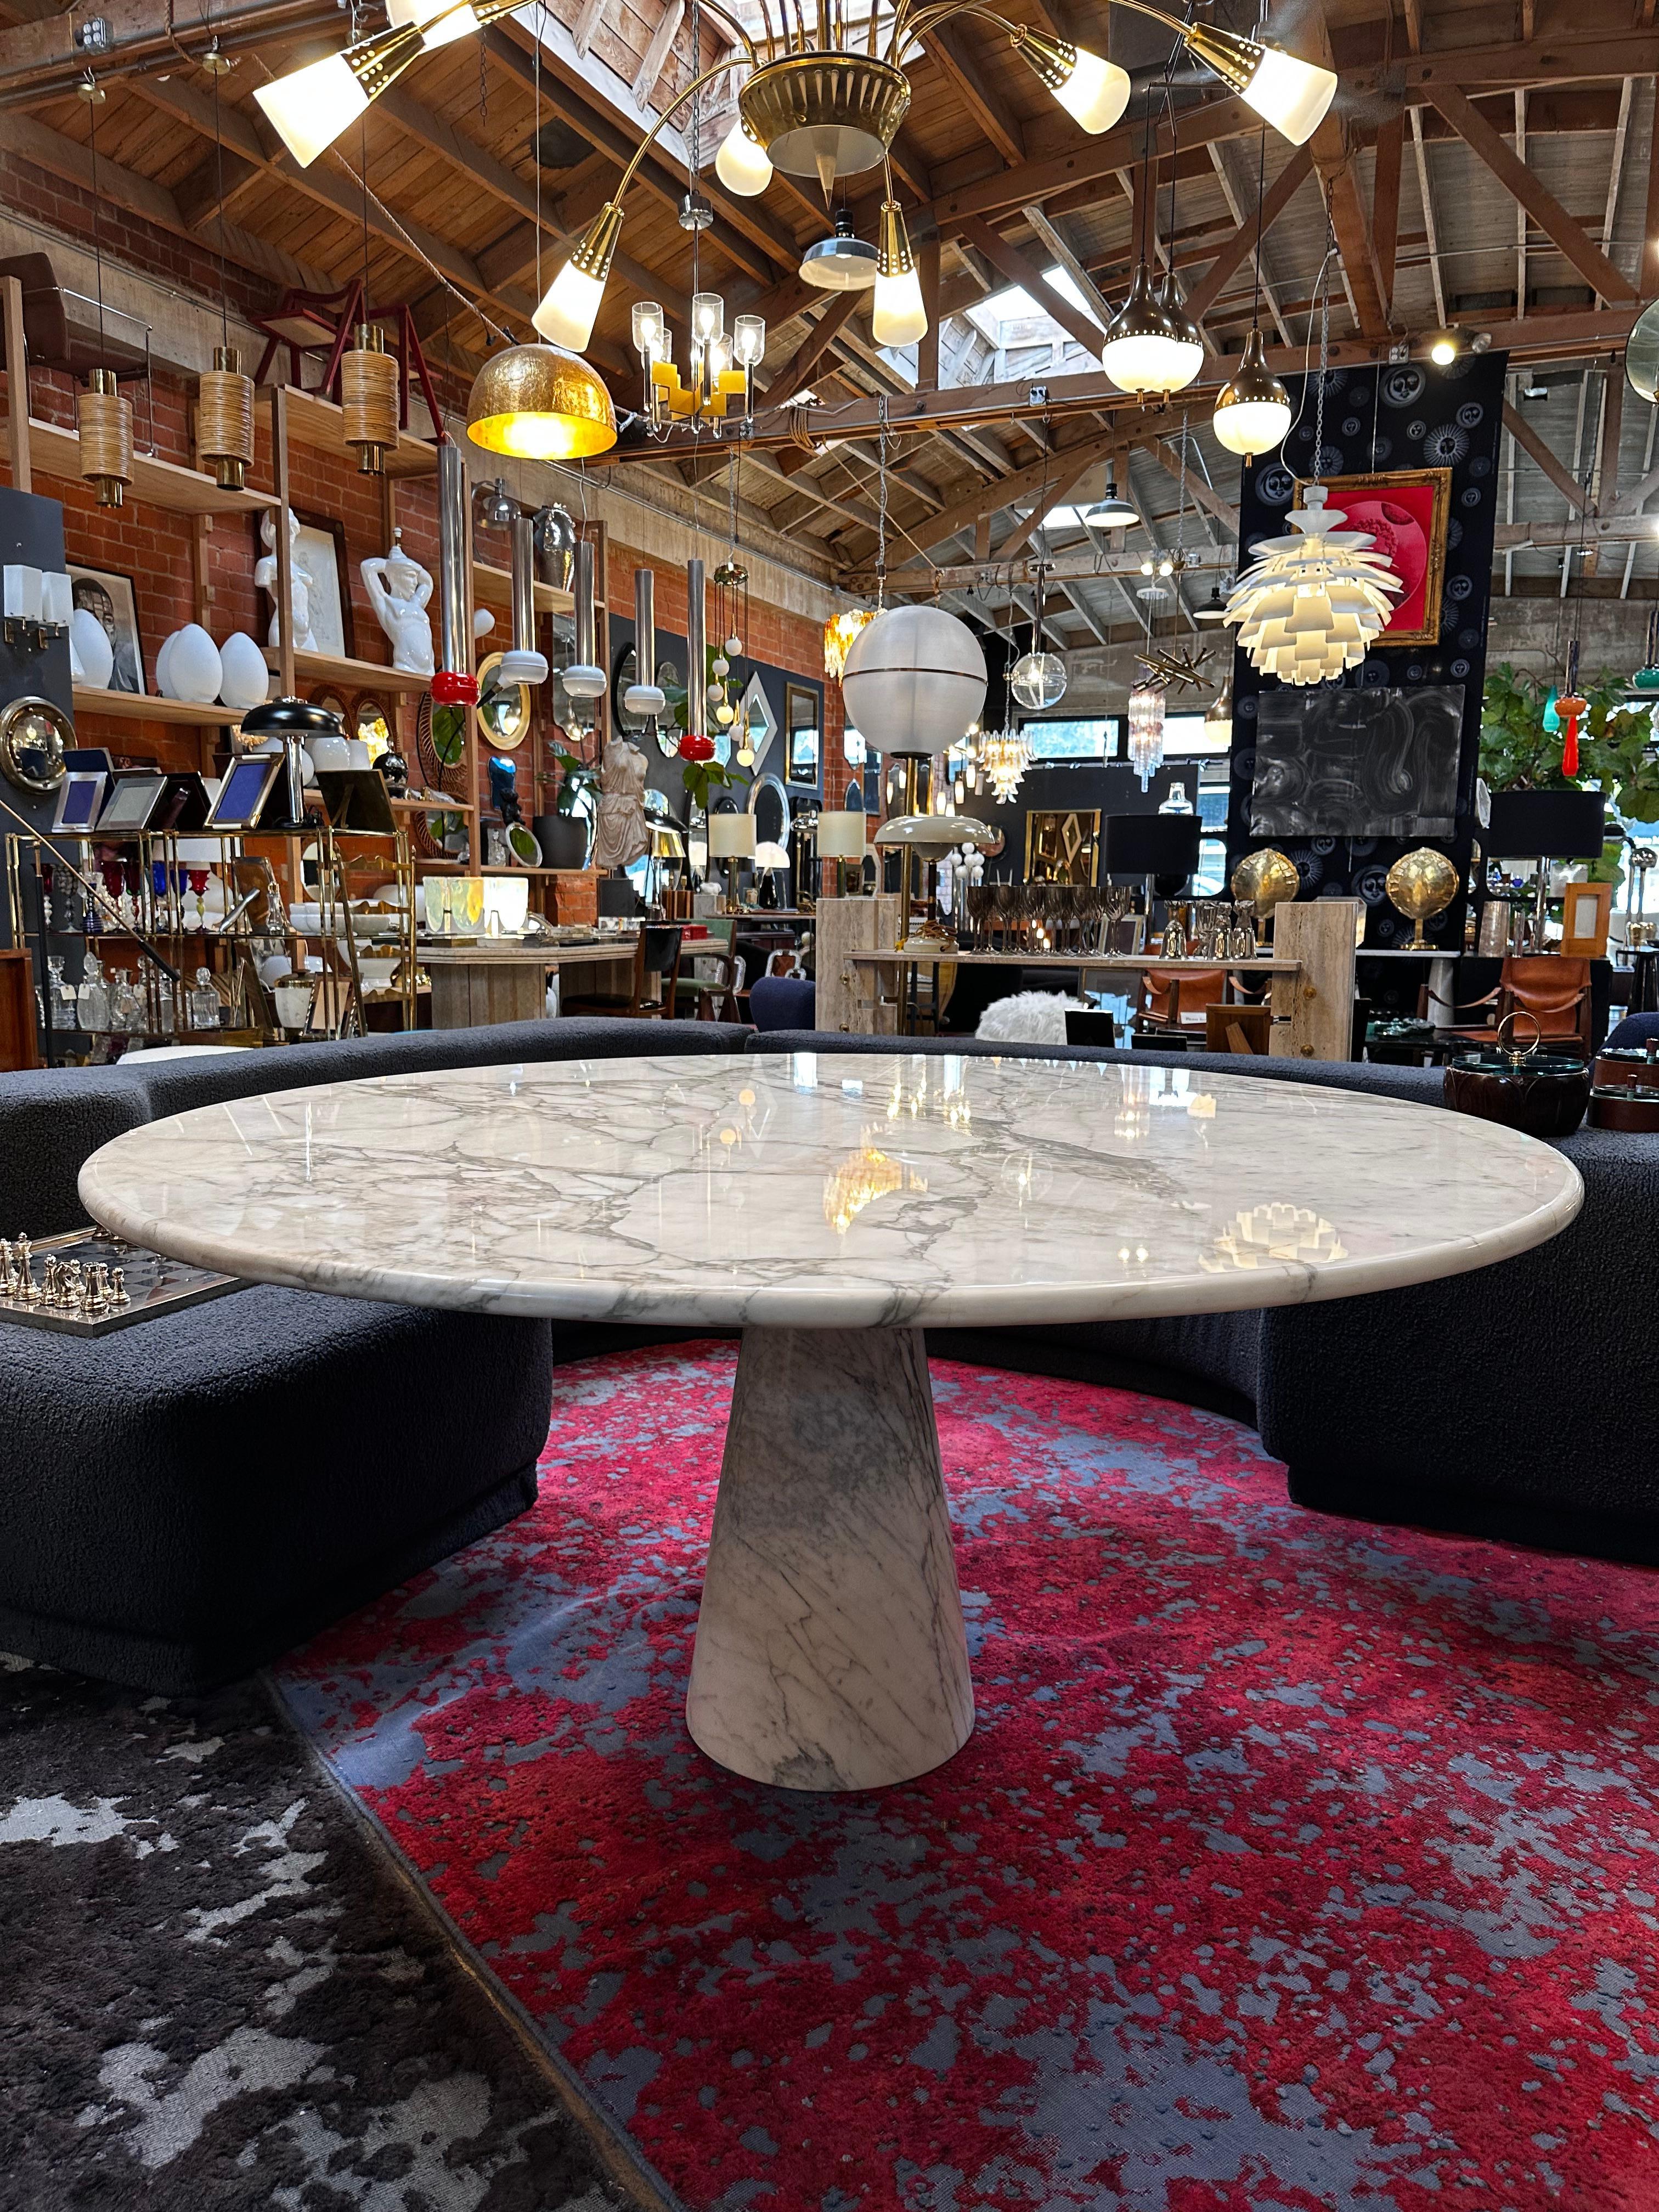 The Angelo Mangiarotti Calacatta Marble Round Oversize Dining Table from the 1970s is a stunning exemplar of Italian design and craftsmanship. This exceptional dining table features a generously proportioned round top meticulously crafted from